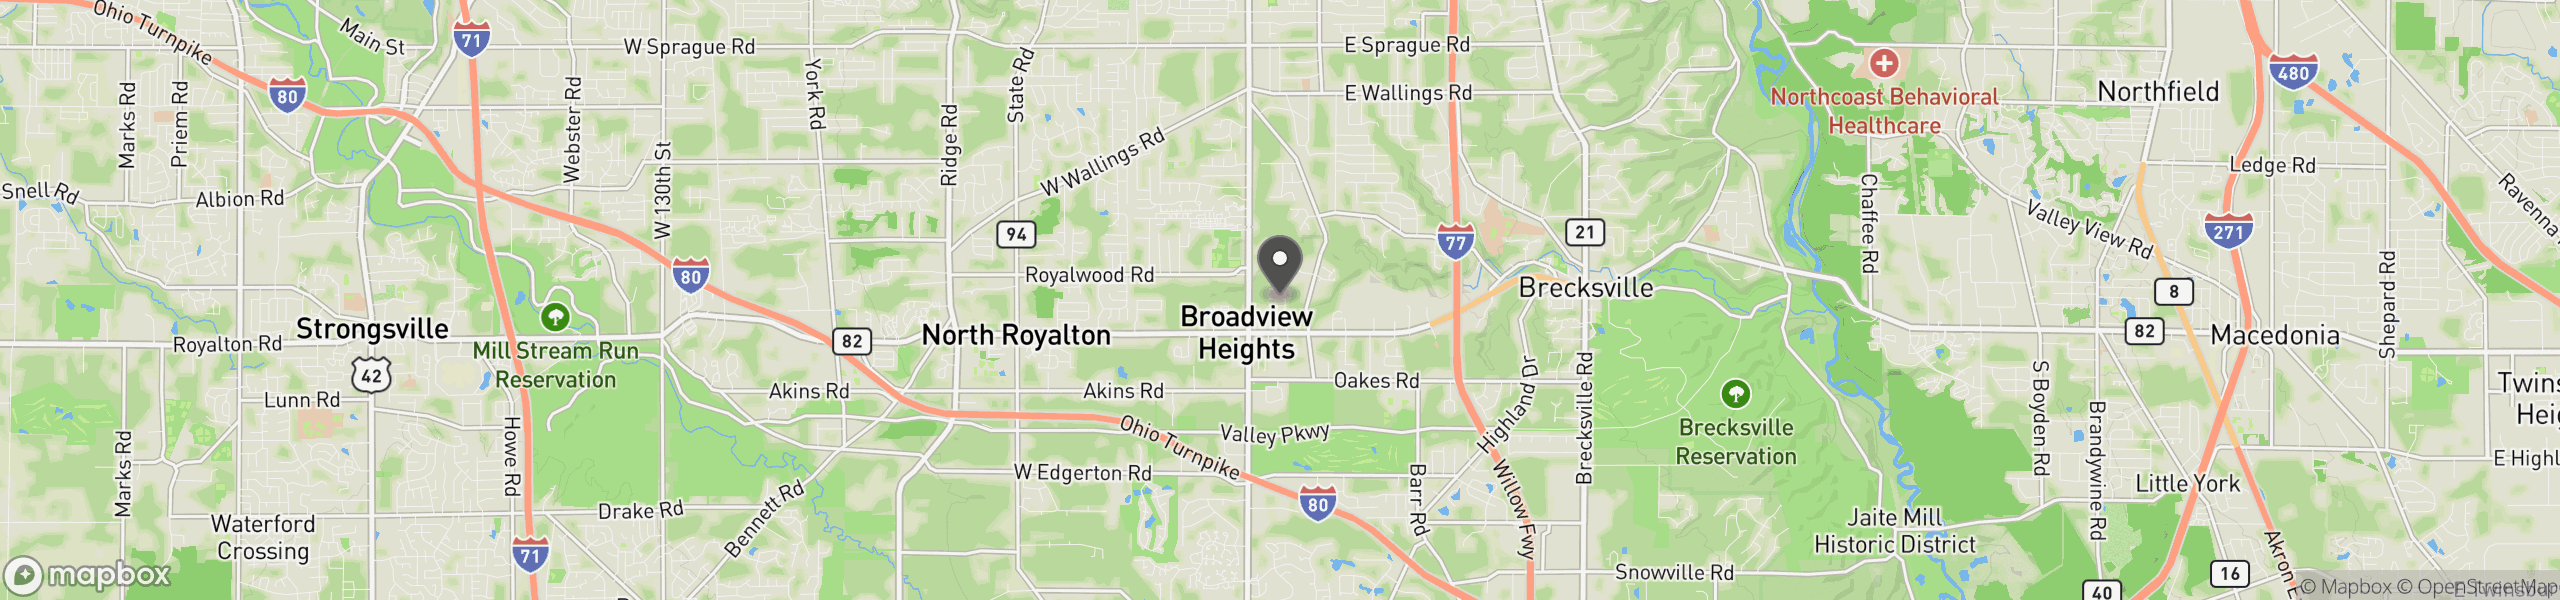 Broadview Heights, OH